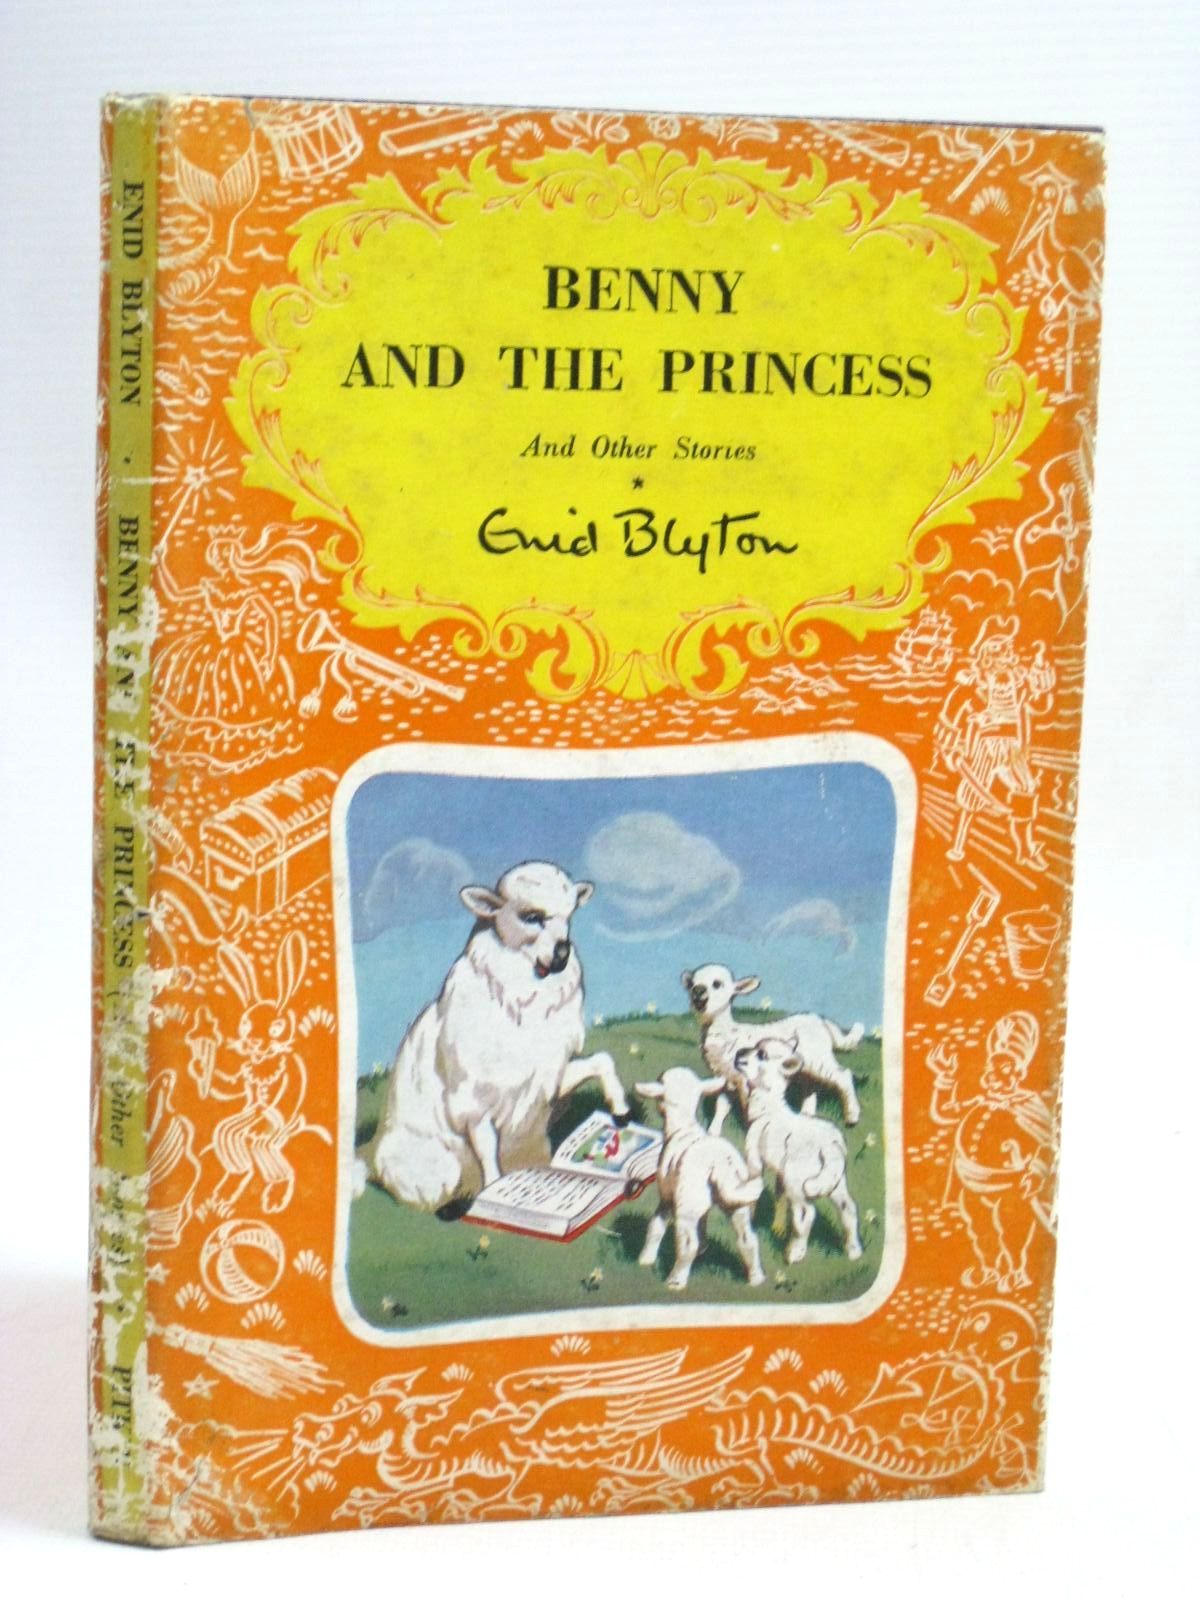 Cover of BENNY AND THE PRINCESS AND OTHER STORIES by Enid Blyton